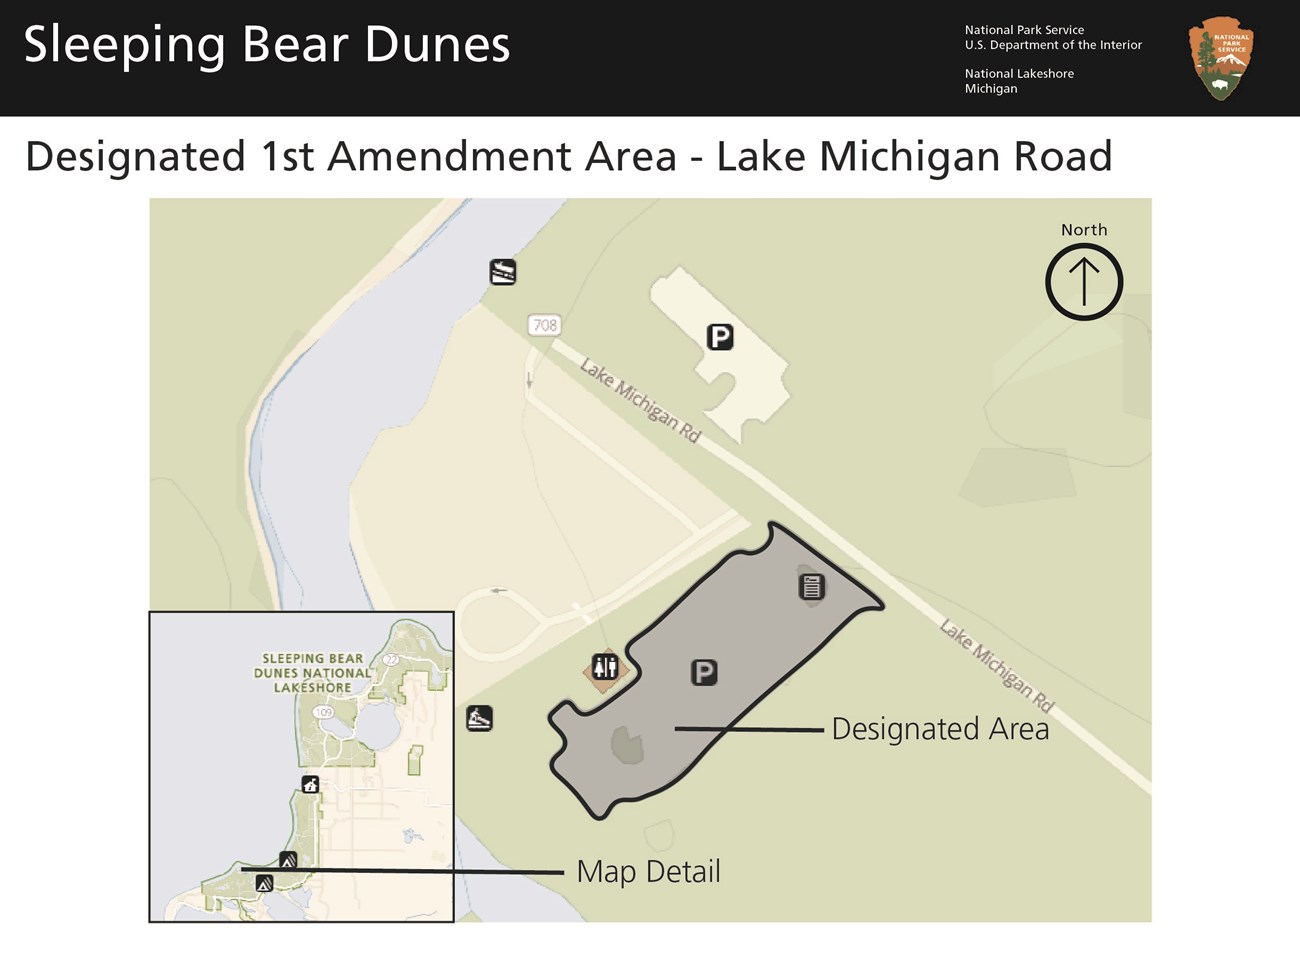 A map of the terminus of Lake Michigan Road including parking lots and boat launch. A section south of the road in the south parking lot is marked in grey. This is the first amendment area. There is a smaller inset map of the park.